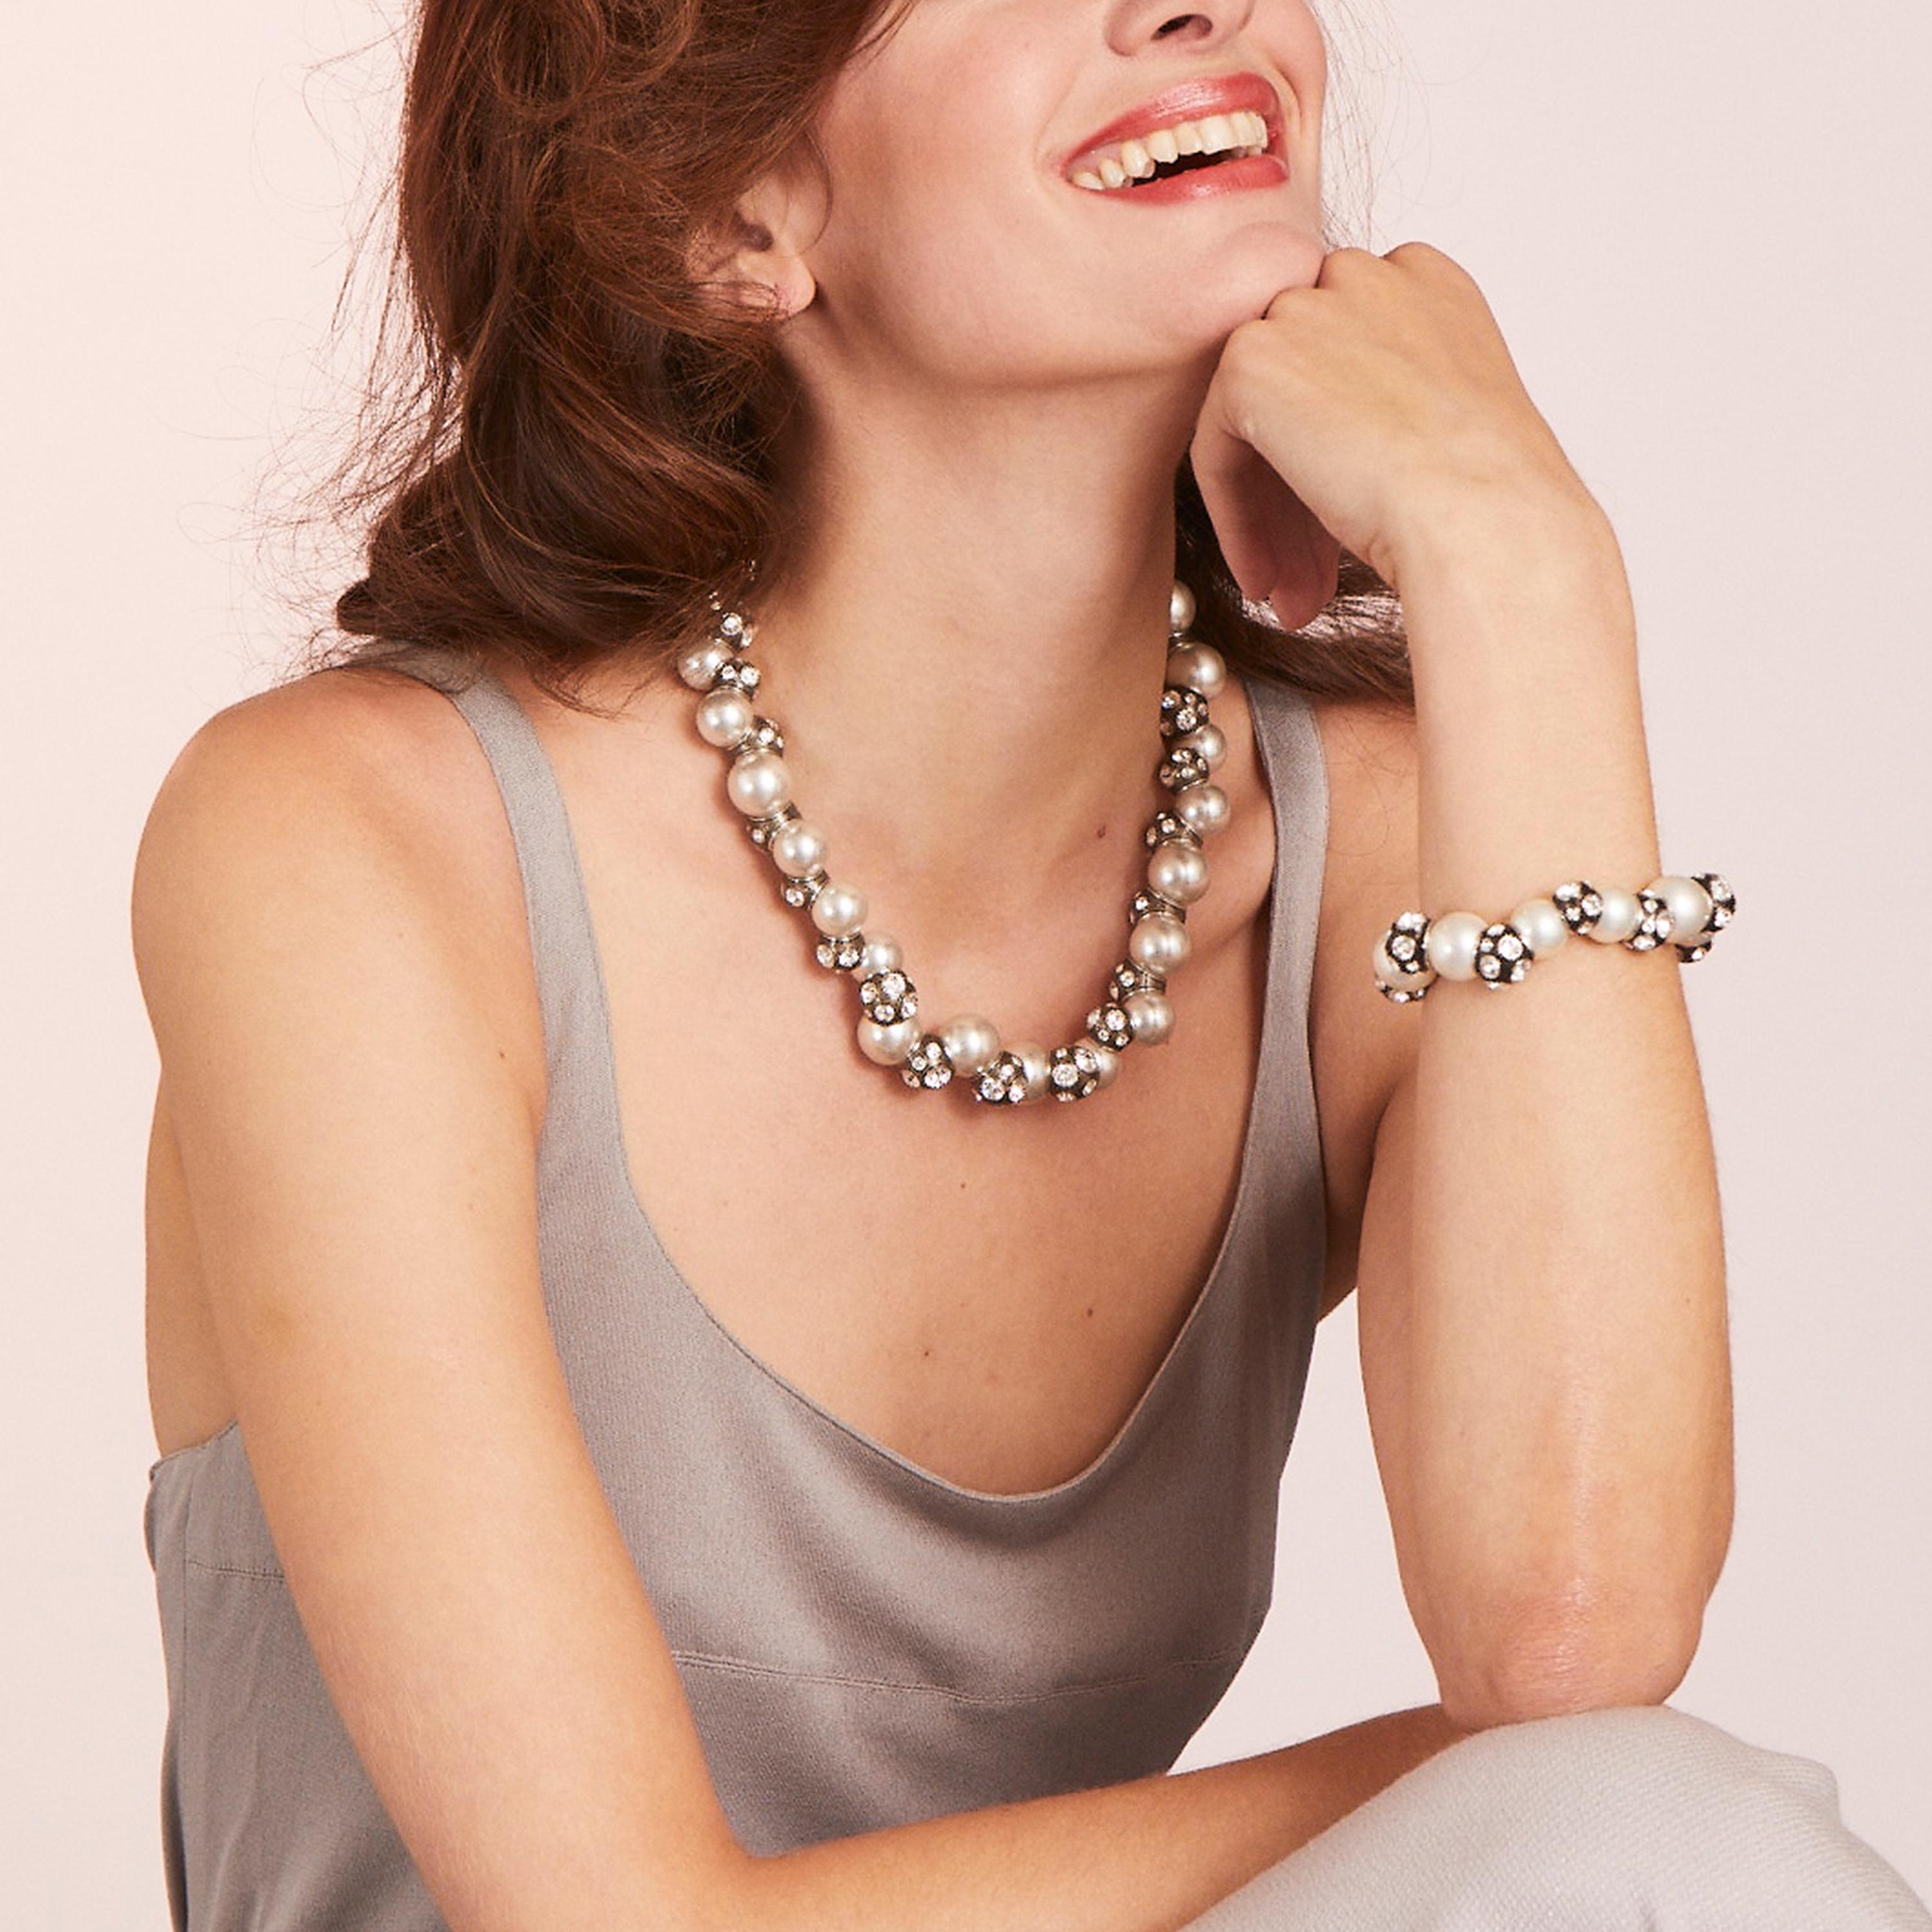 A fusion of alternating pearls and bespoke metal beads, each section of the necklace freely rotates creating new shapes and alignments. The gentle lustre of the pearls illuminates the skin and bathes the wearer in a warm glow. The crystal details